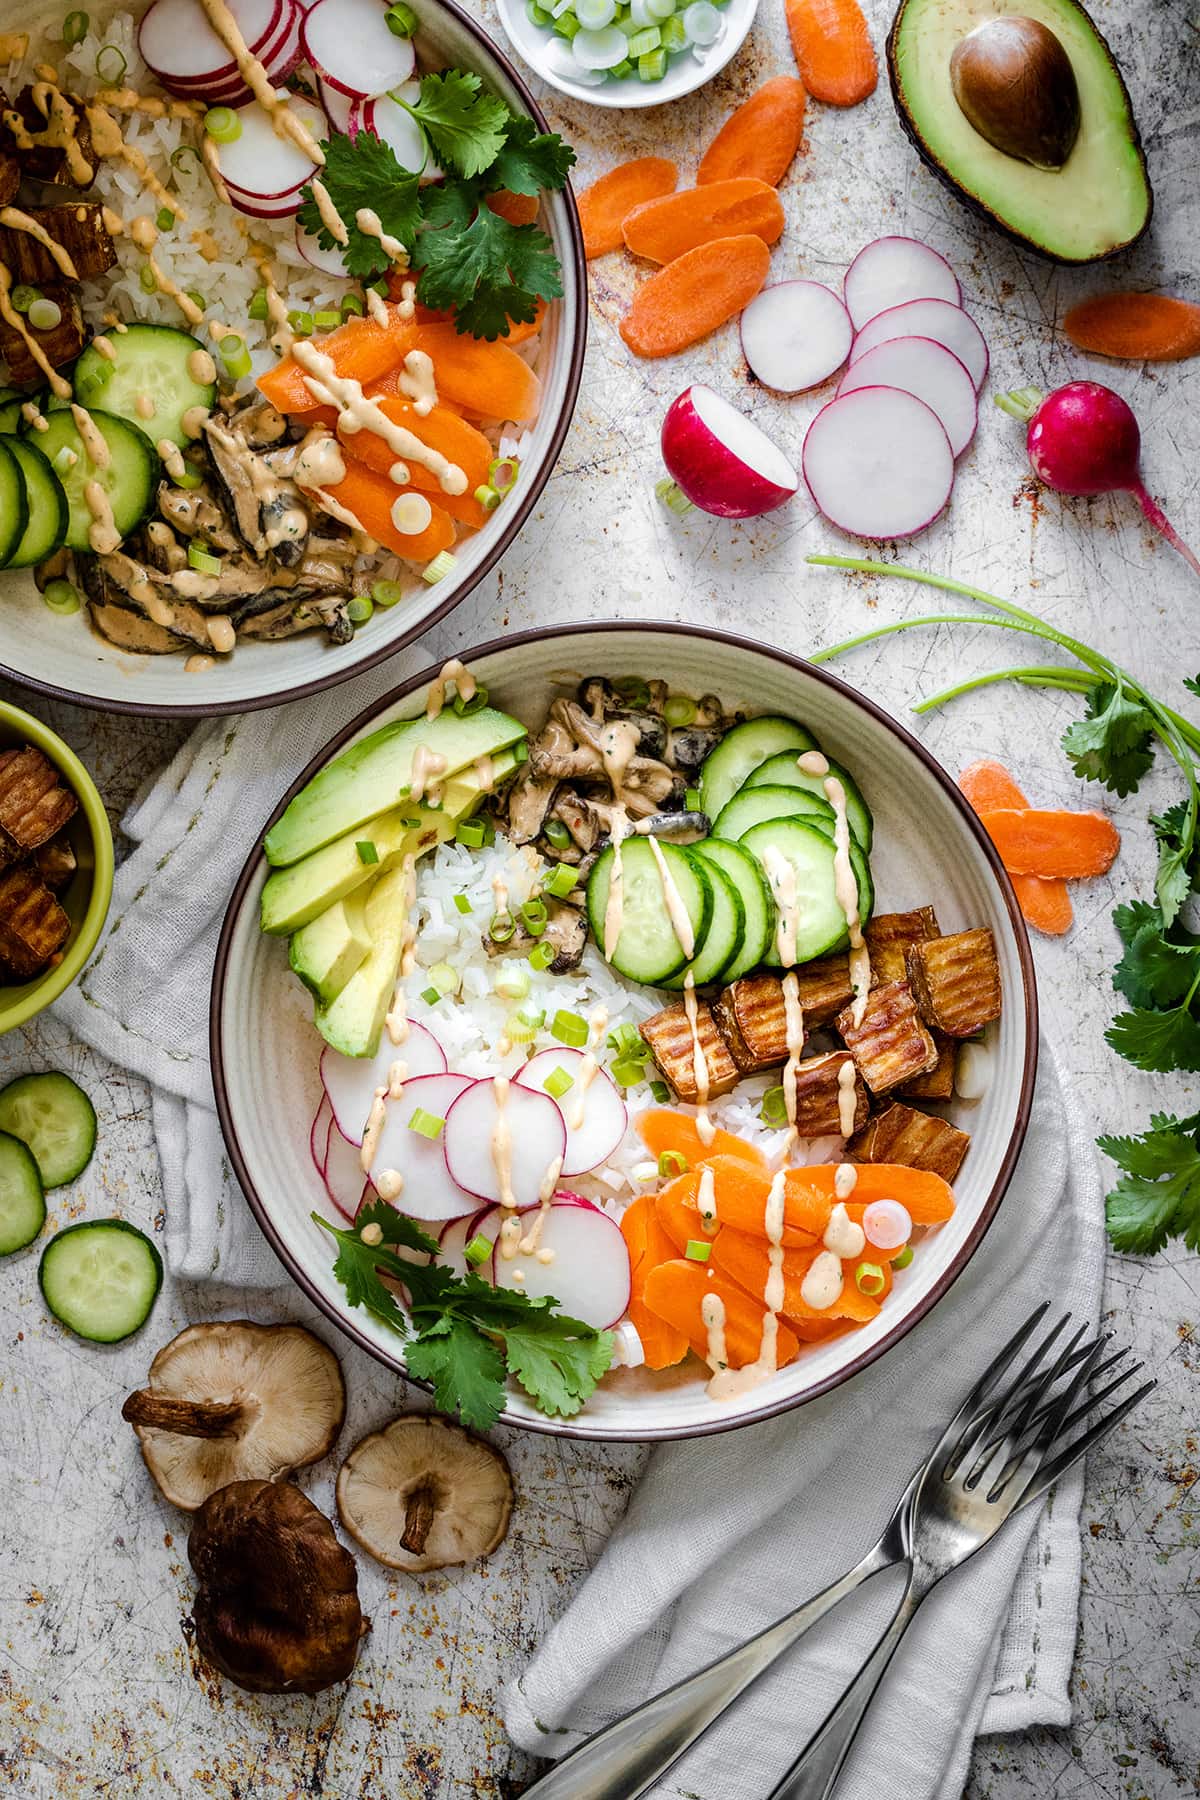 Two deconstructed sushi bowls with veggies and tofu surrounded by ingredients and two forks next to them